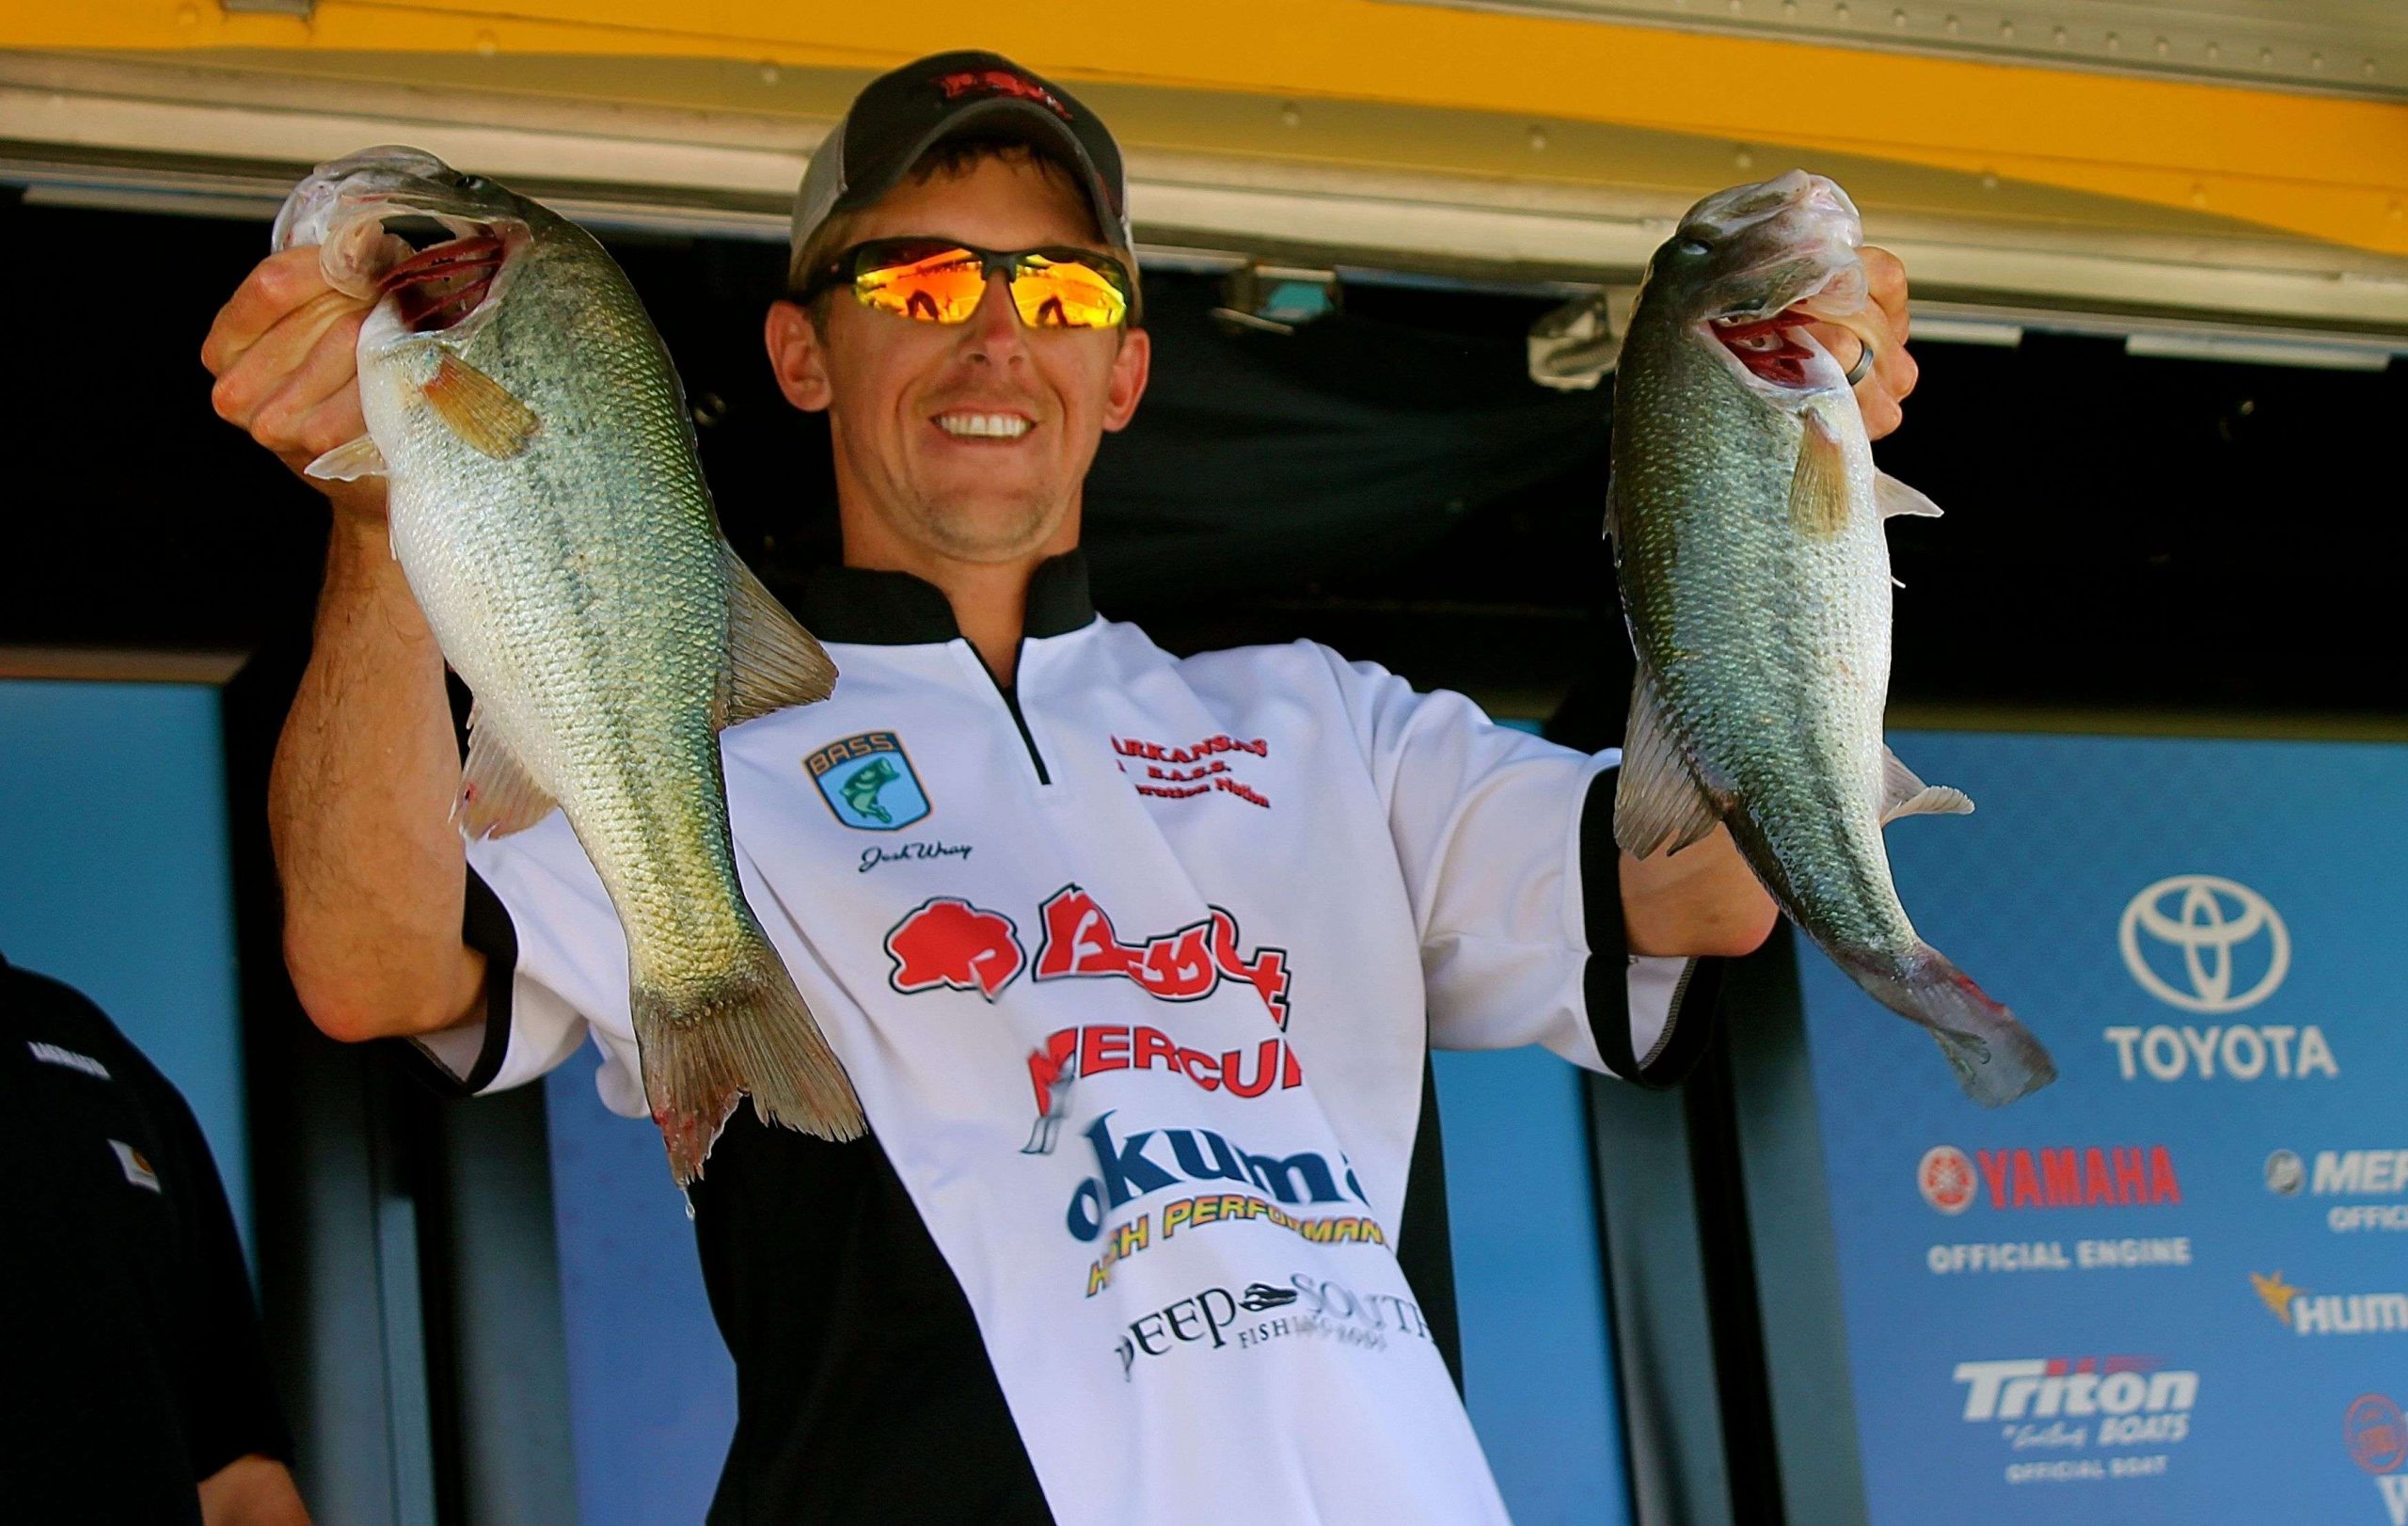 Josh Wray of Omaha, Ark., leads the B.A.S.S. Nation Central Divisional after Day 1. The Arkansas B.A.S.S. Nation angler caught a five-bass limit weighing 14 pounds, 13 ounces on a day when limits were hard to come by; fewer than a dozen anglers caught five. When heâs not fishing, Wray works as an insurance agent.